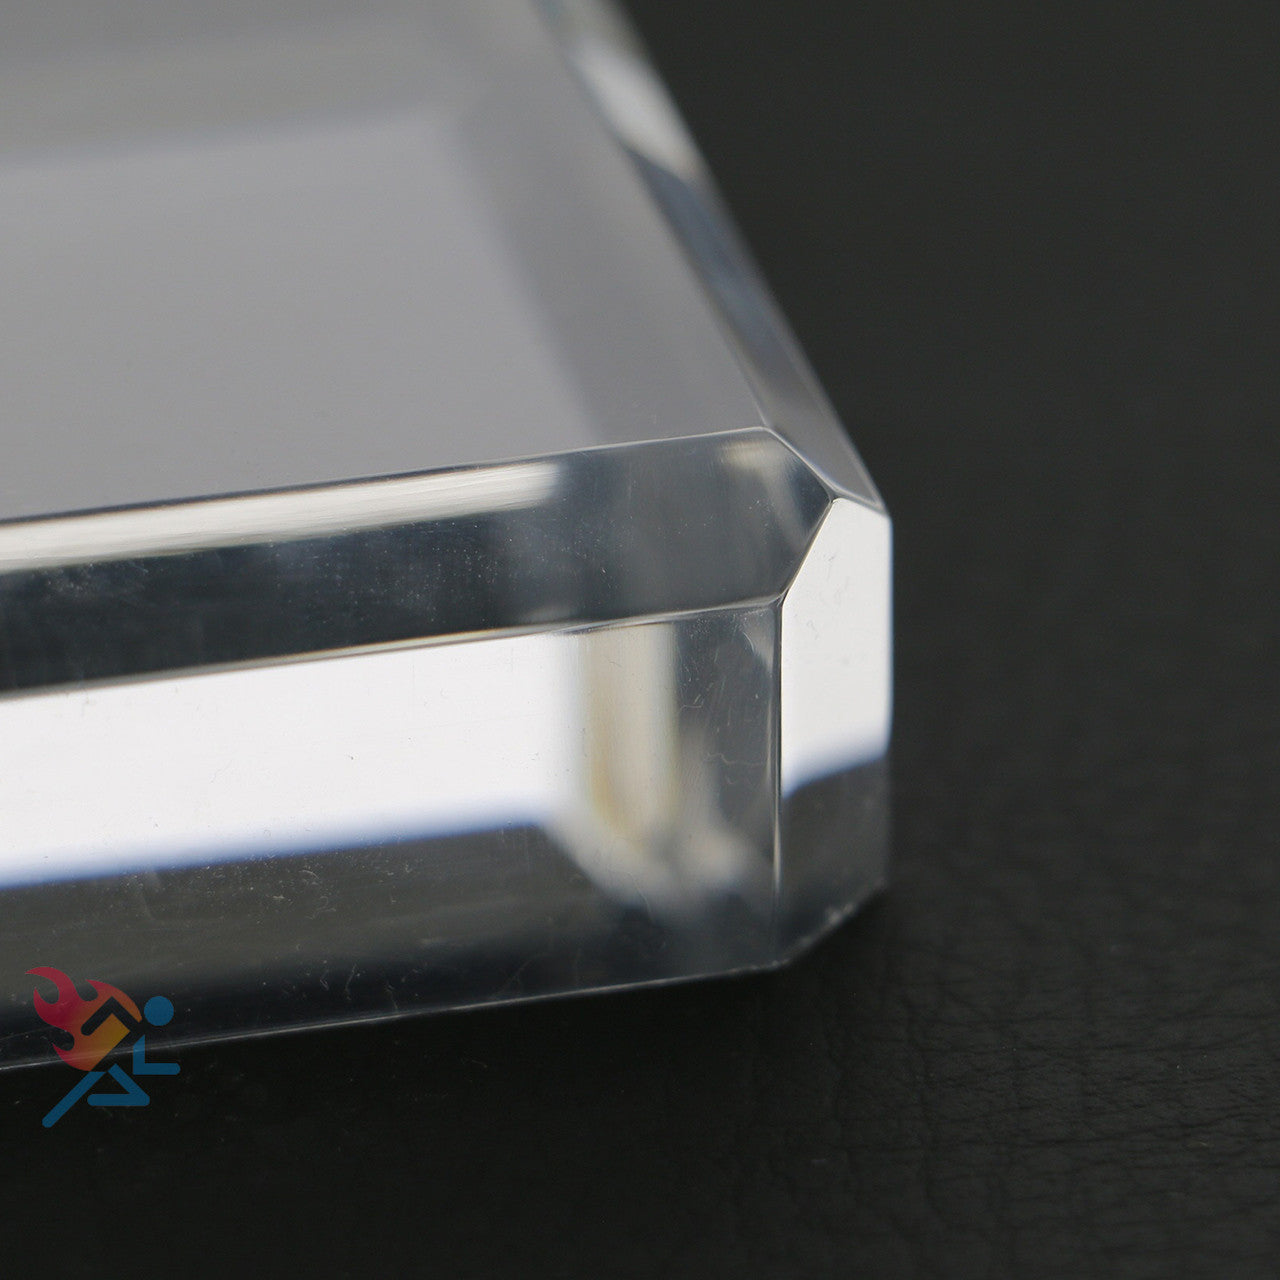 Acrylic Display Stand Block with Beveled Edge, 1" H x 3" Square